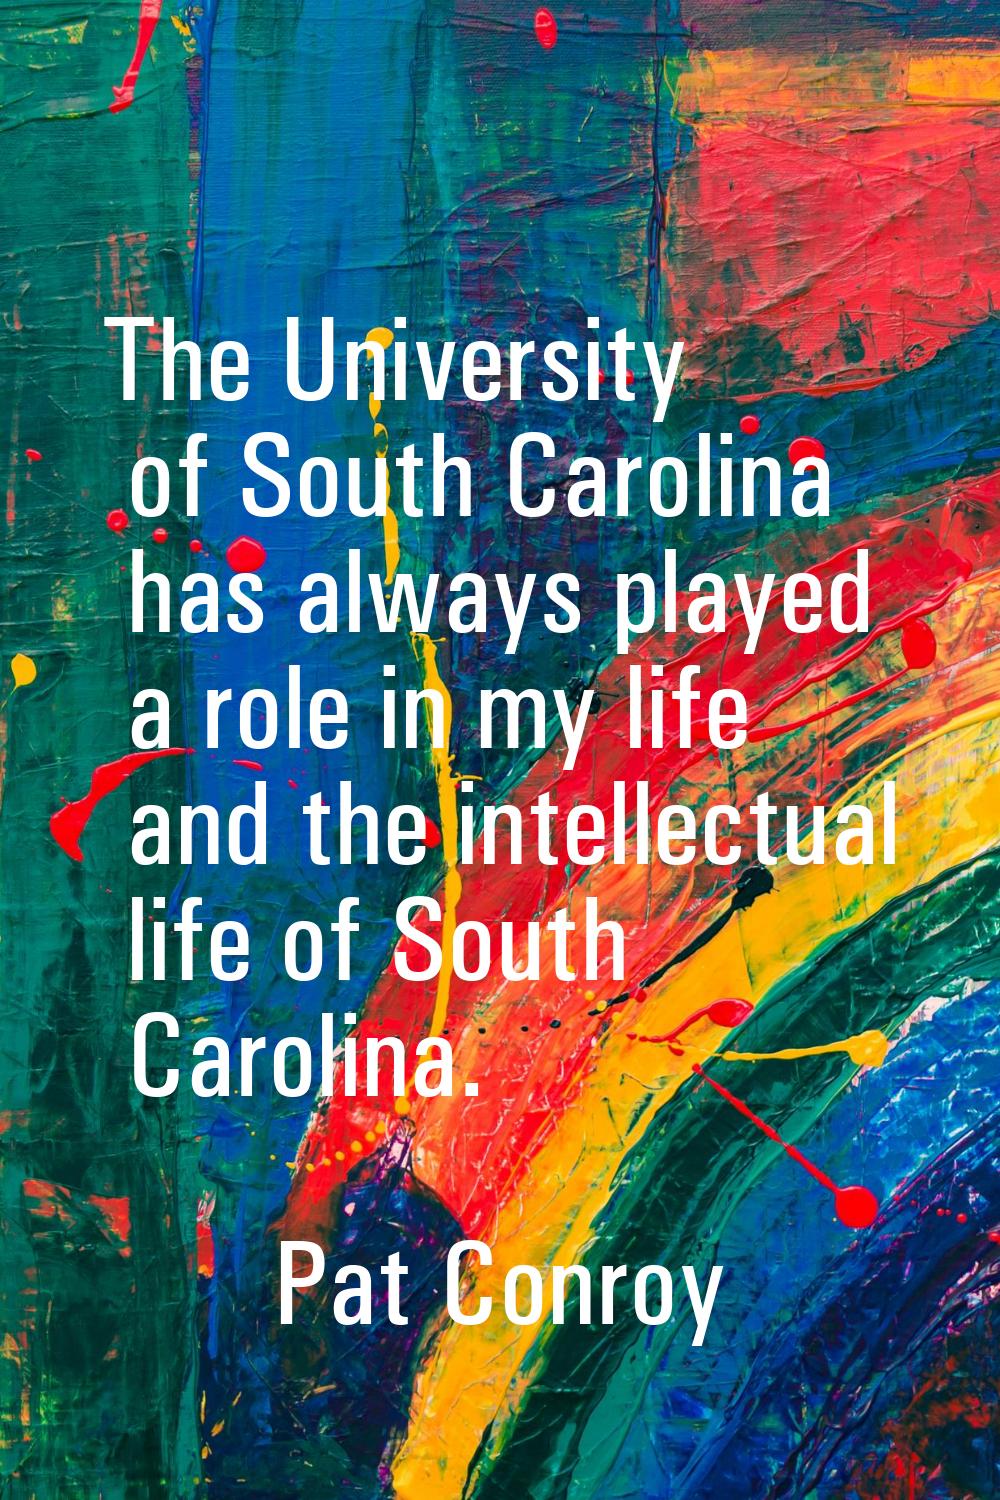 The University of South Carolina has always played a role in my life and the intellectual life of S